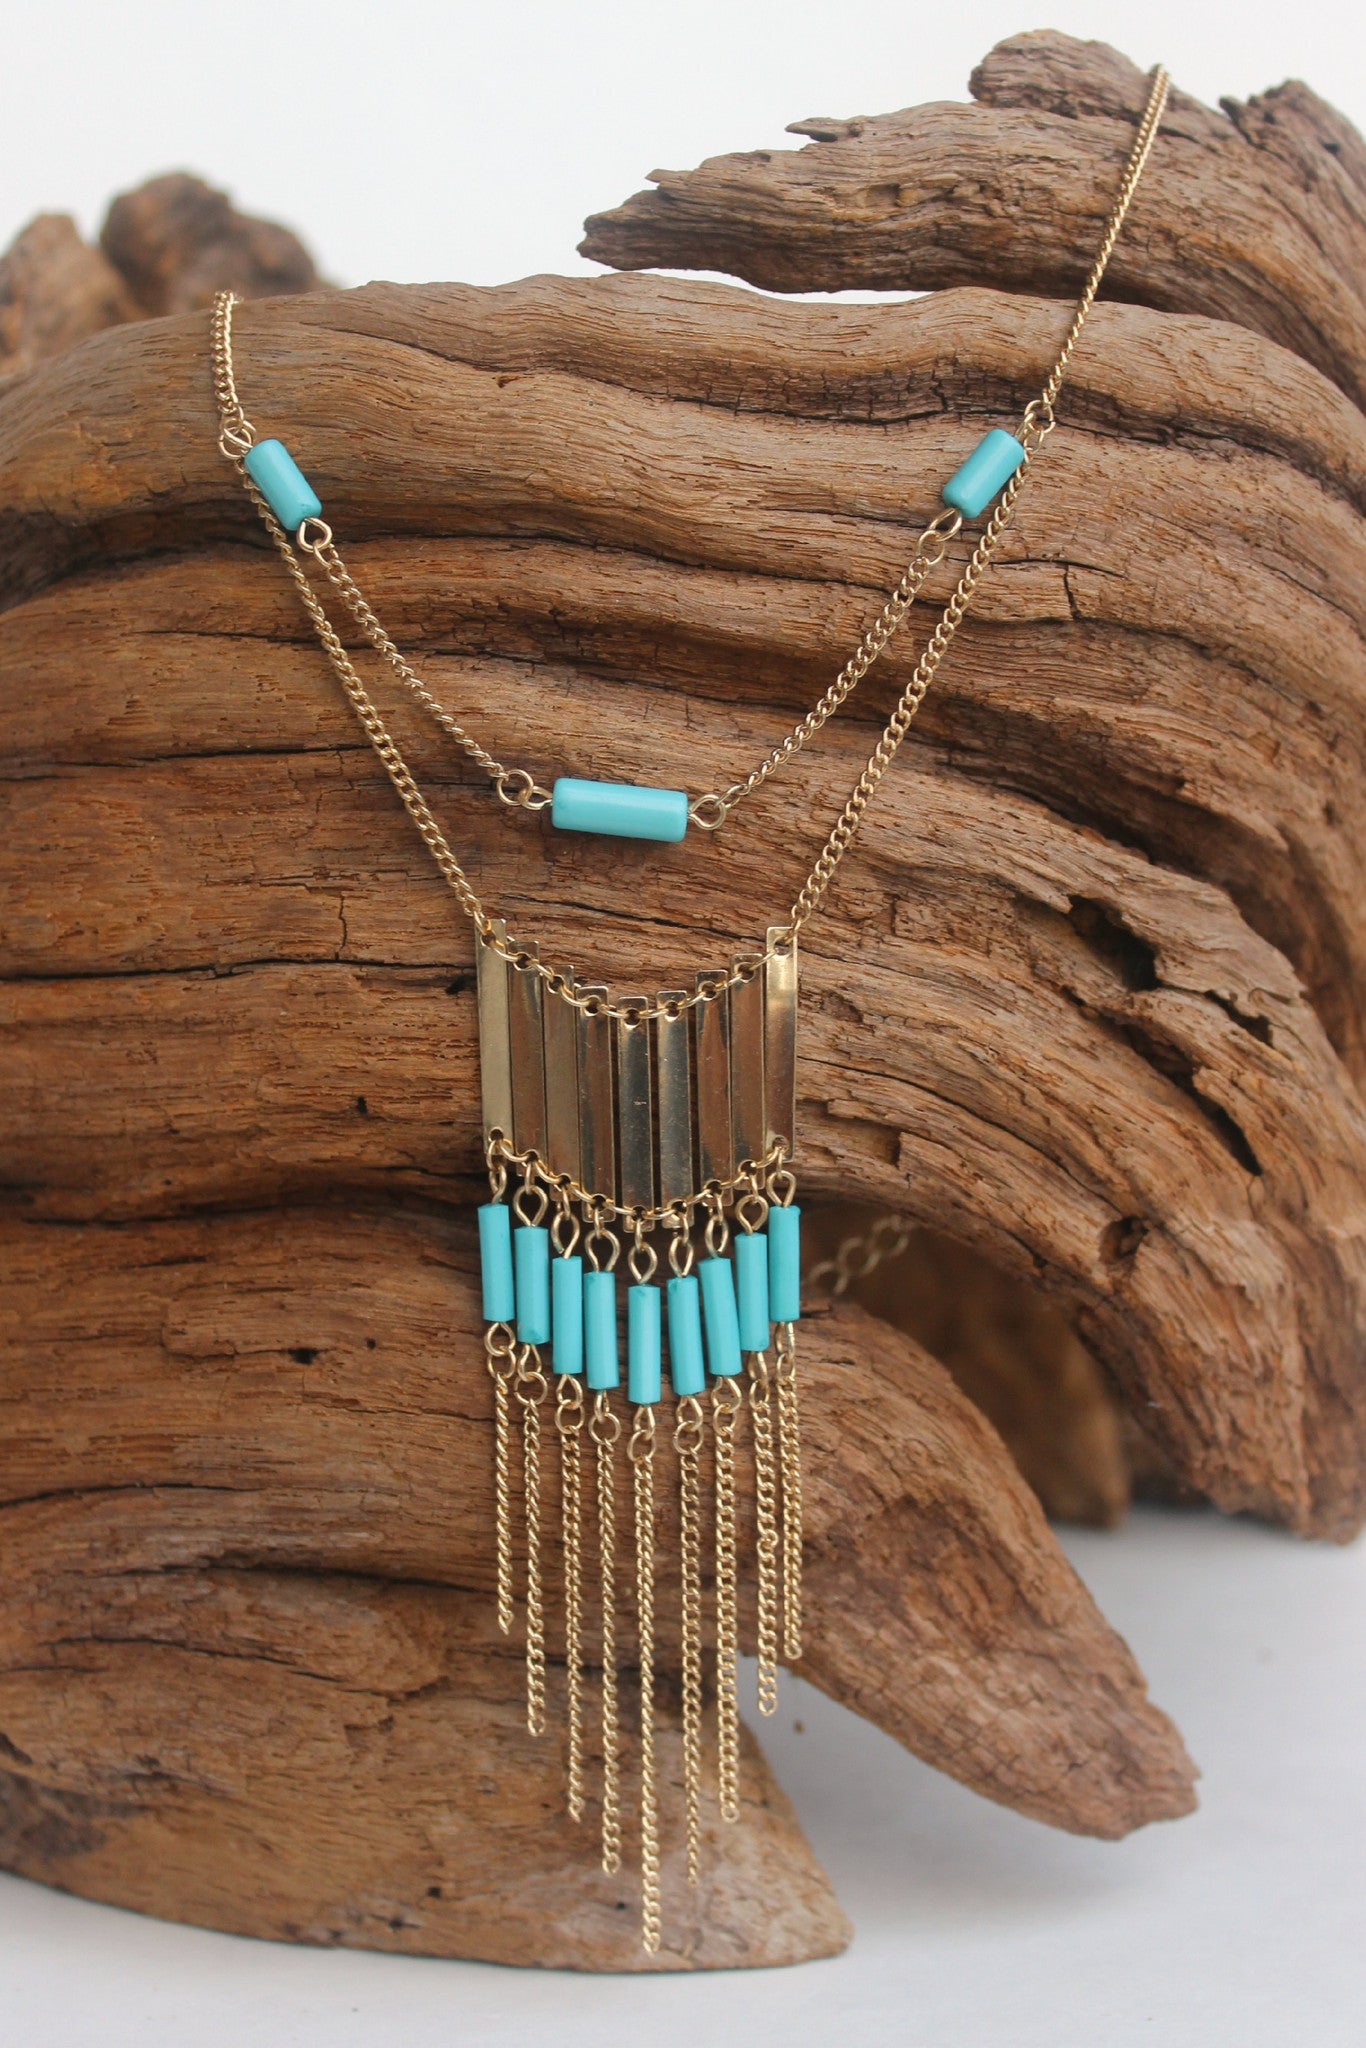 Bars, Beads, and Chains Necklace, Turquoise